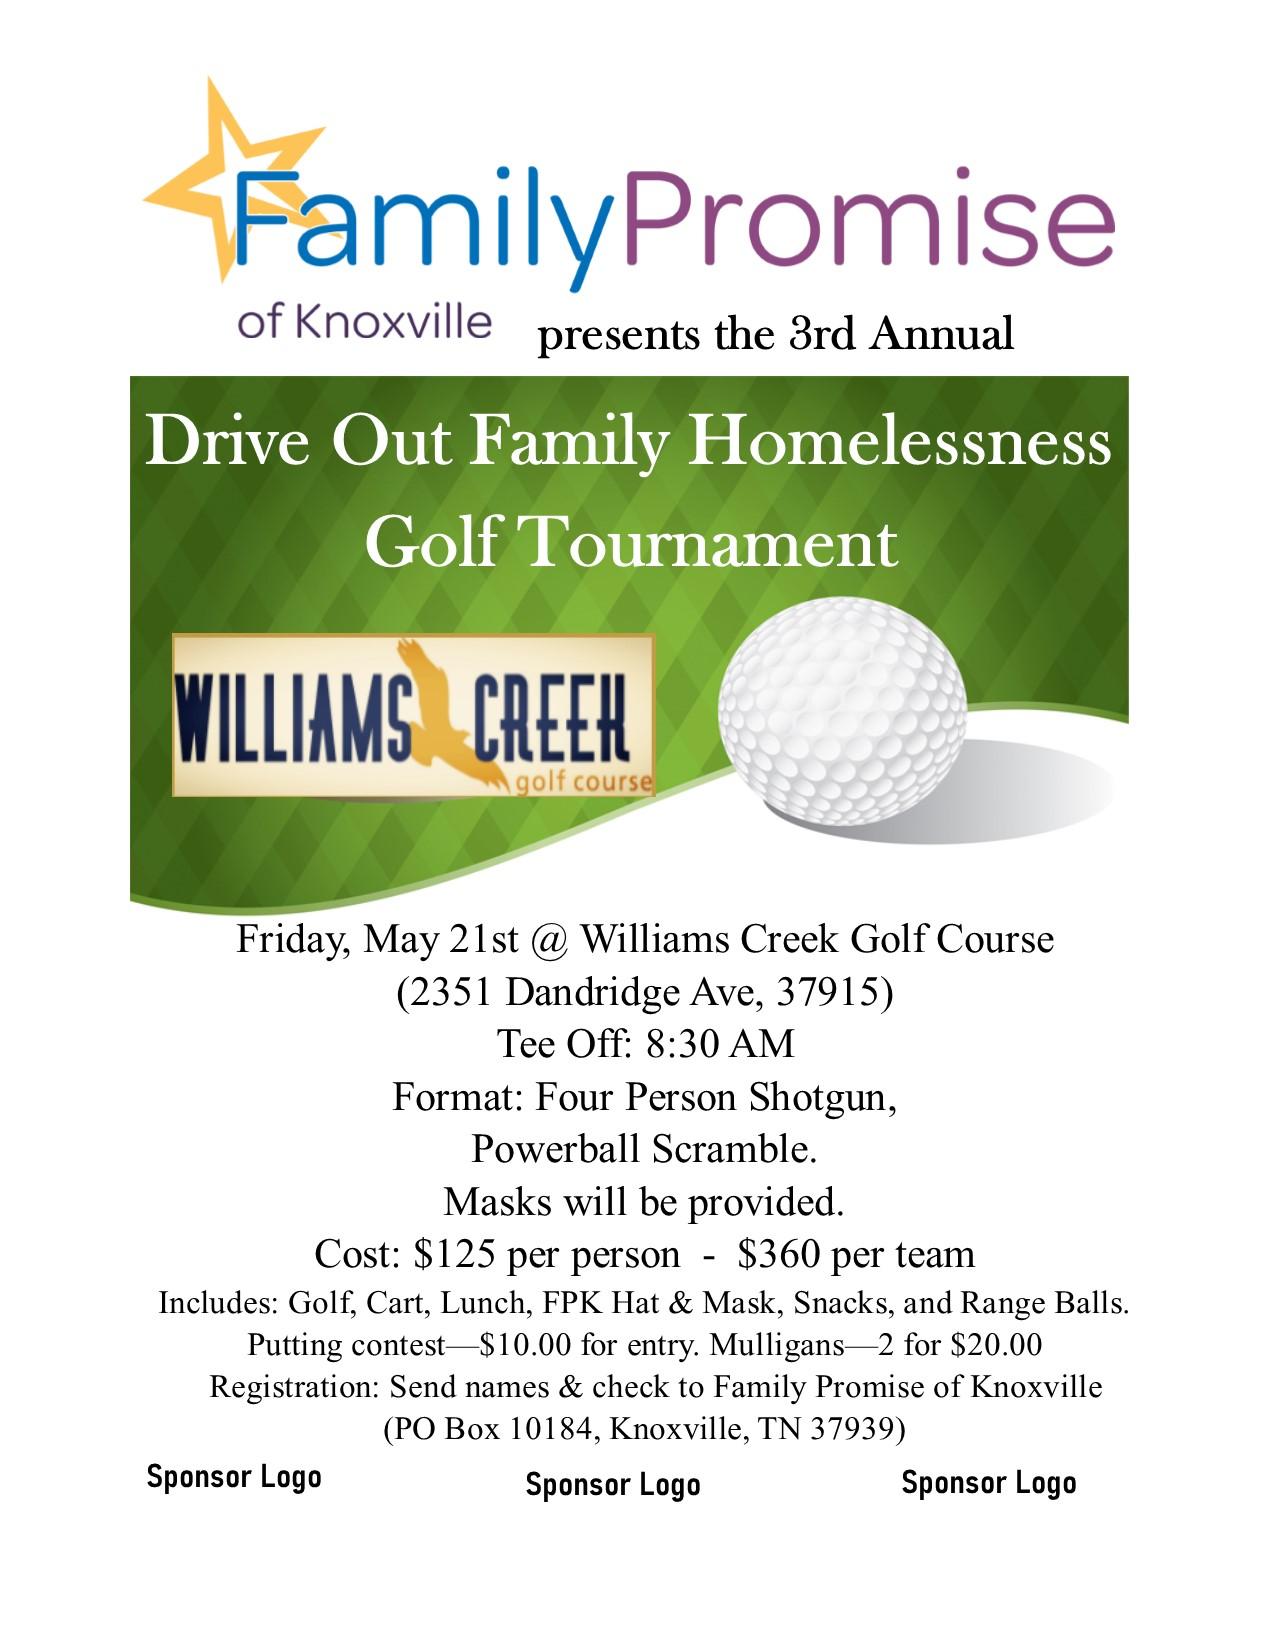 Family Promise of Knoxville: Drive Out Family Homelessness Golf Tournament